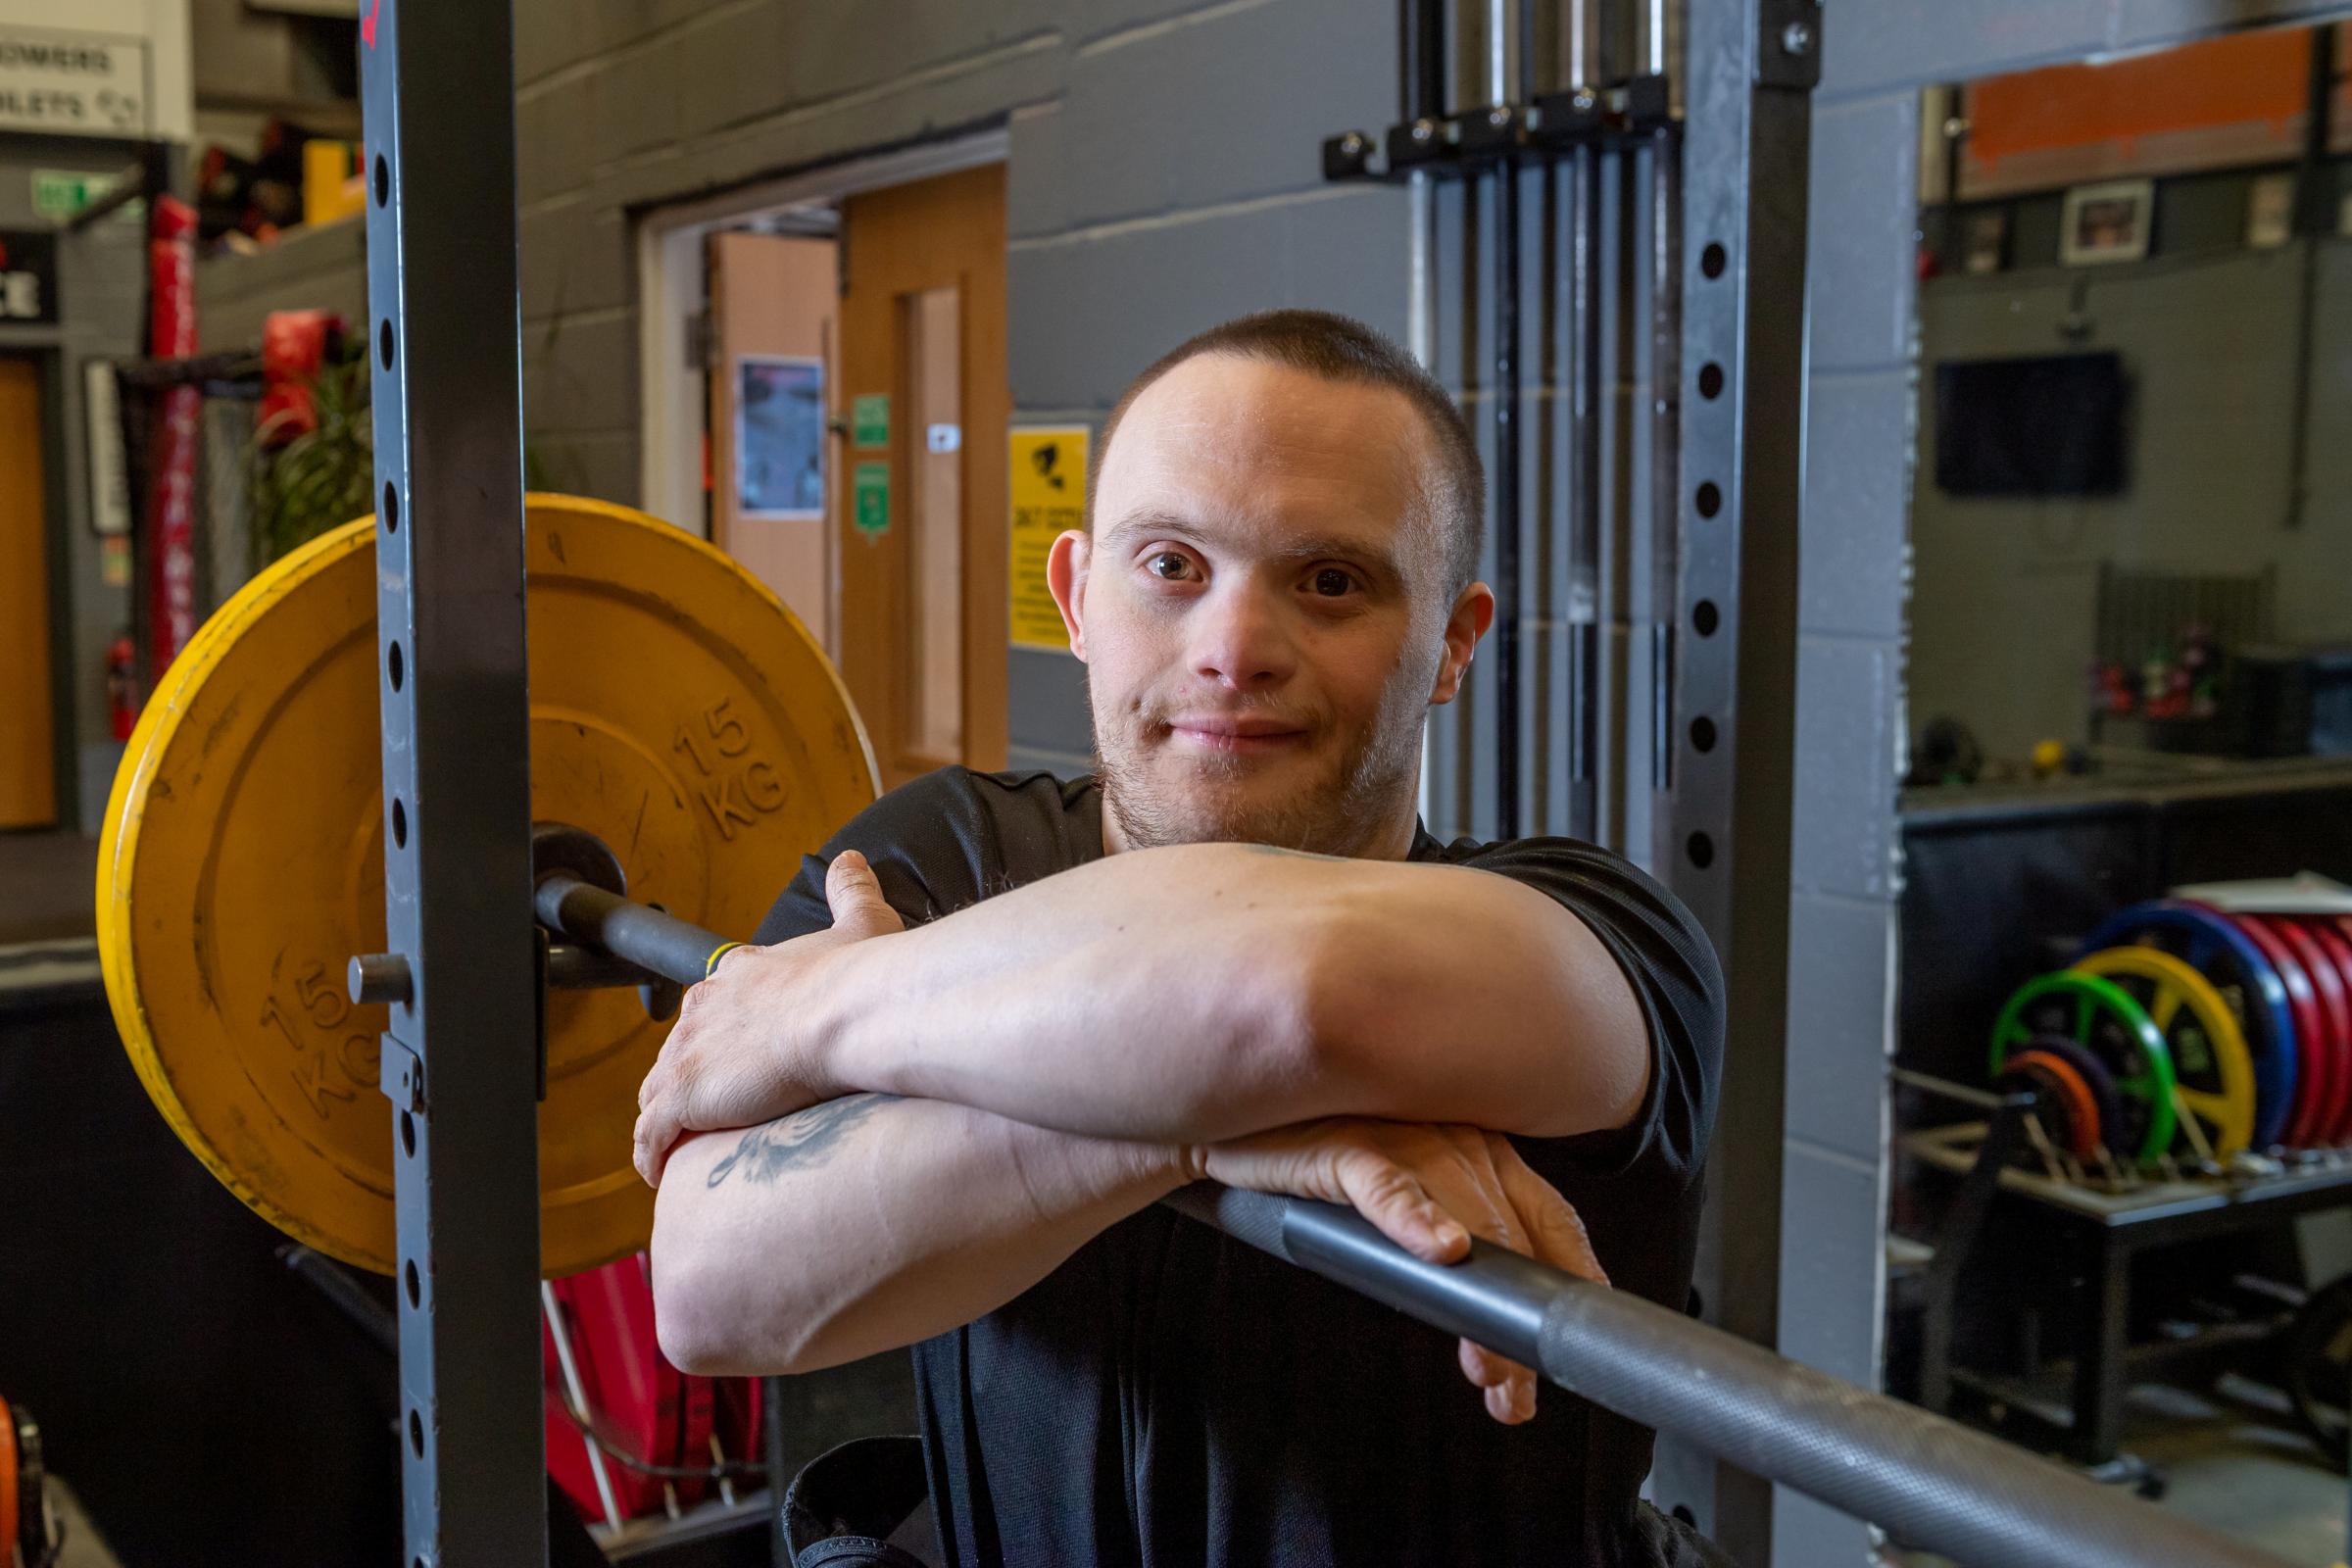 Daniel McGauley doing a workout at his gym in Colchester Essex. Powerlifter Daniel, who has Downs Syndrome and autism has been crowned British Champion. See SWNS story SWCAlift. A powerlifter with Downs Syndrome whose parents were told he would never